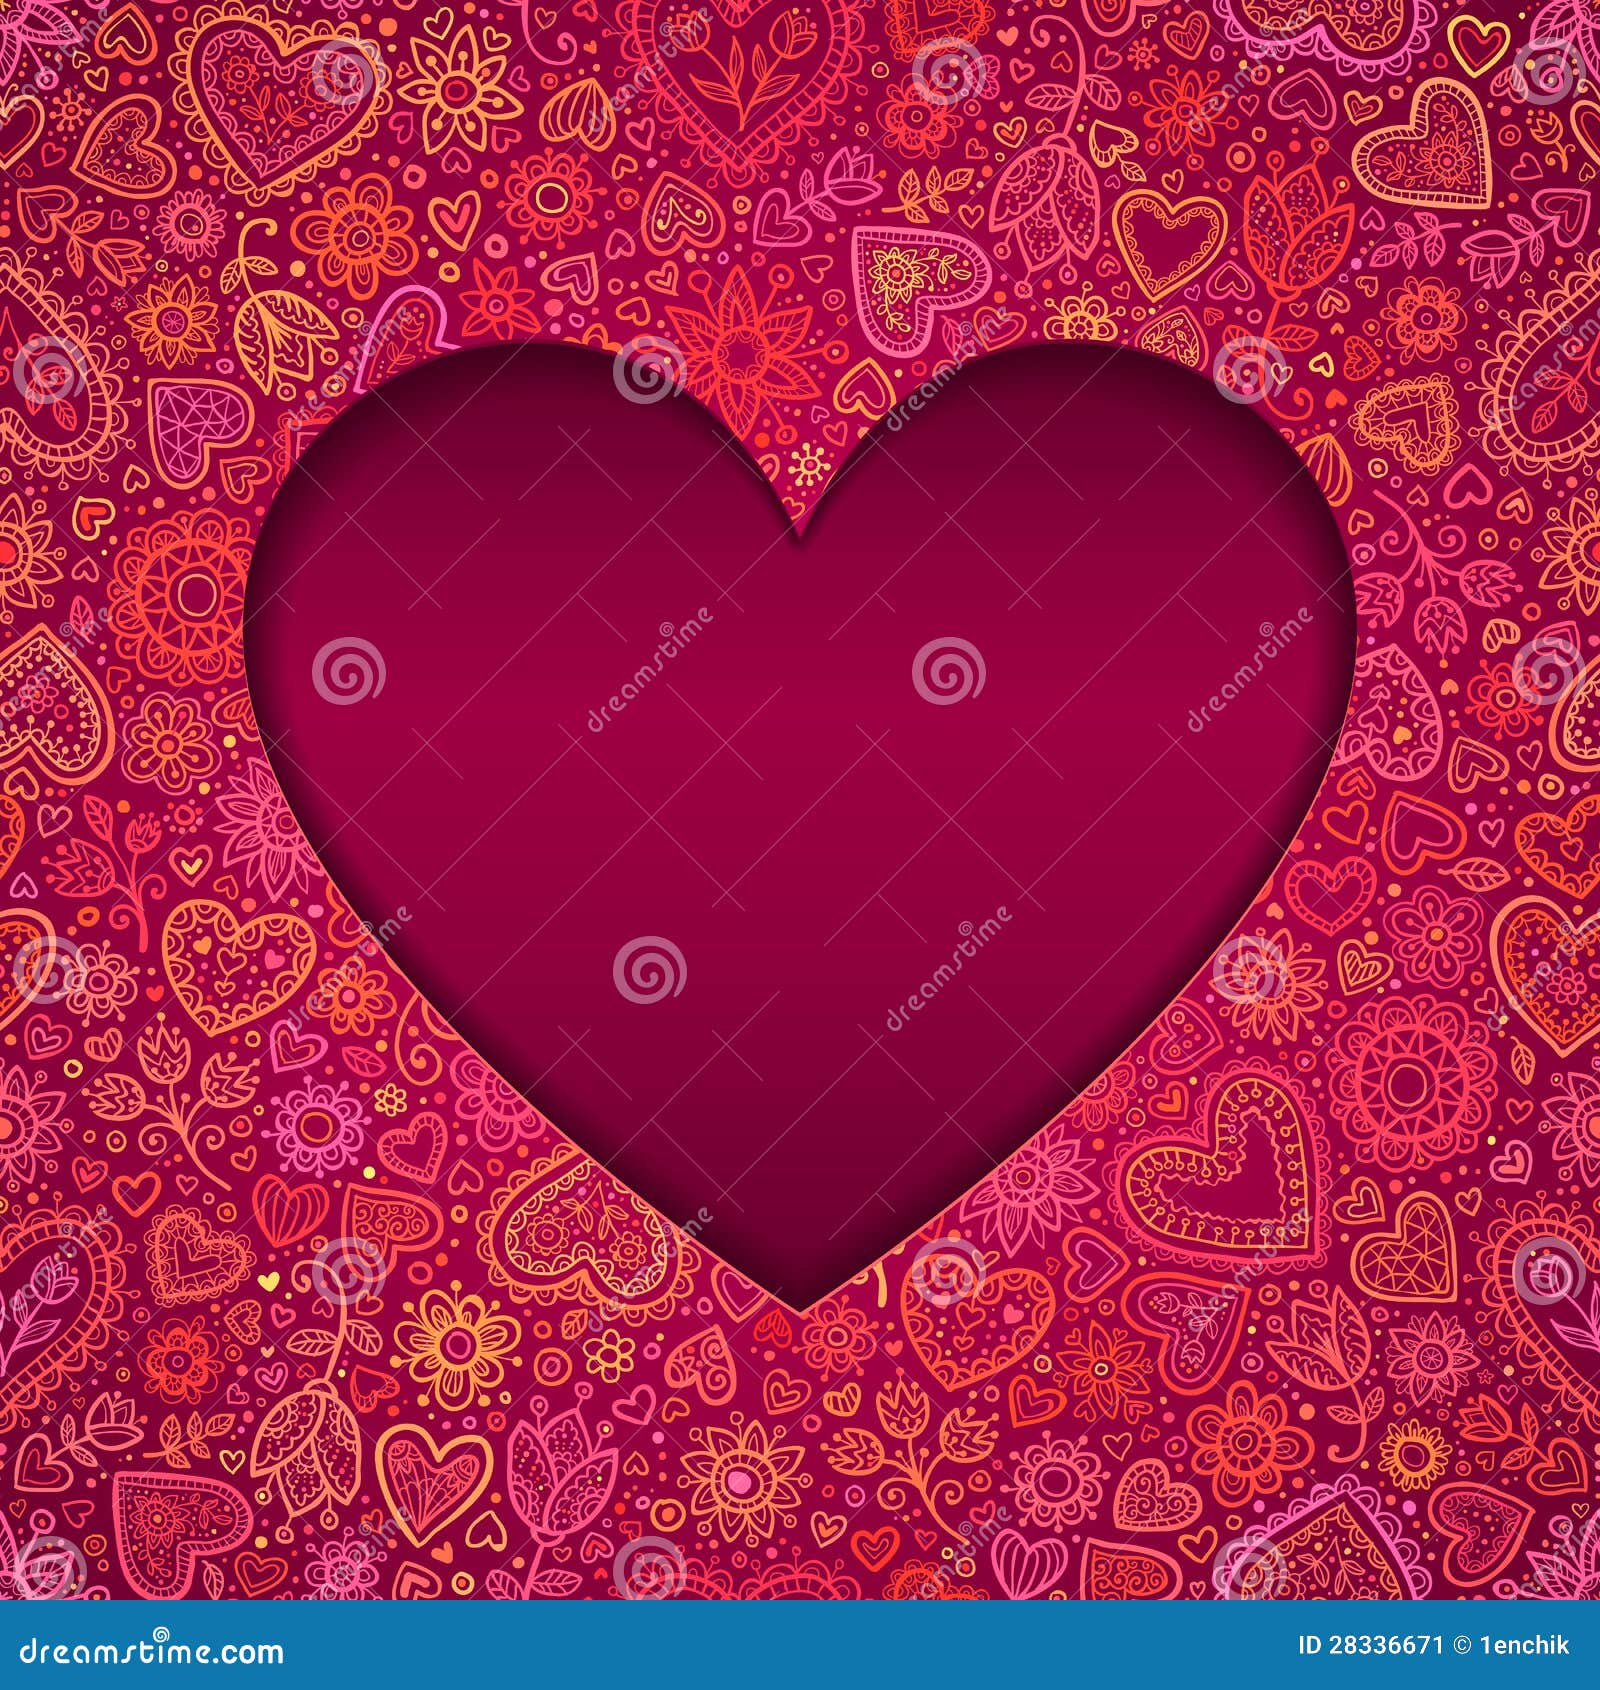 Cut Out Paper Heart Valentines Day Card Stock Image - Image: 28336671